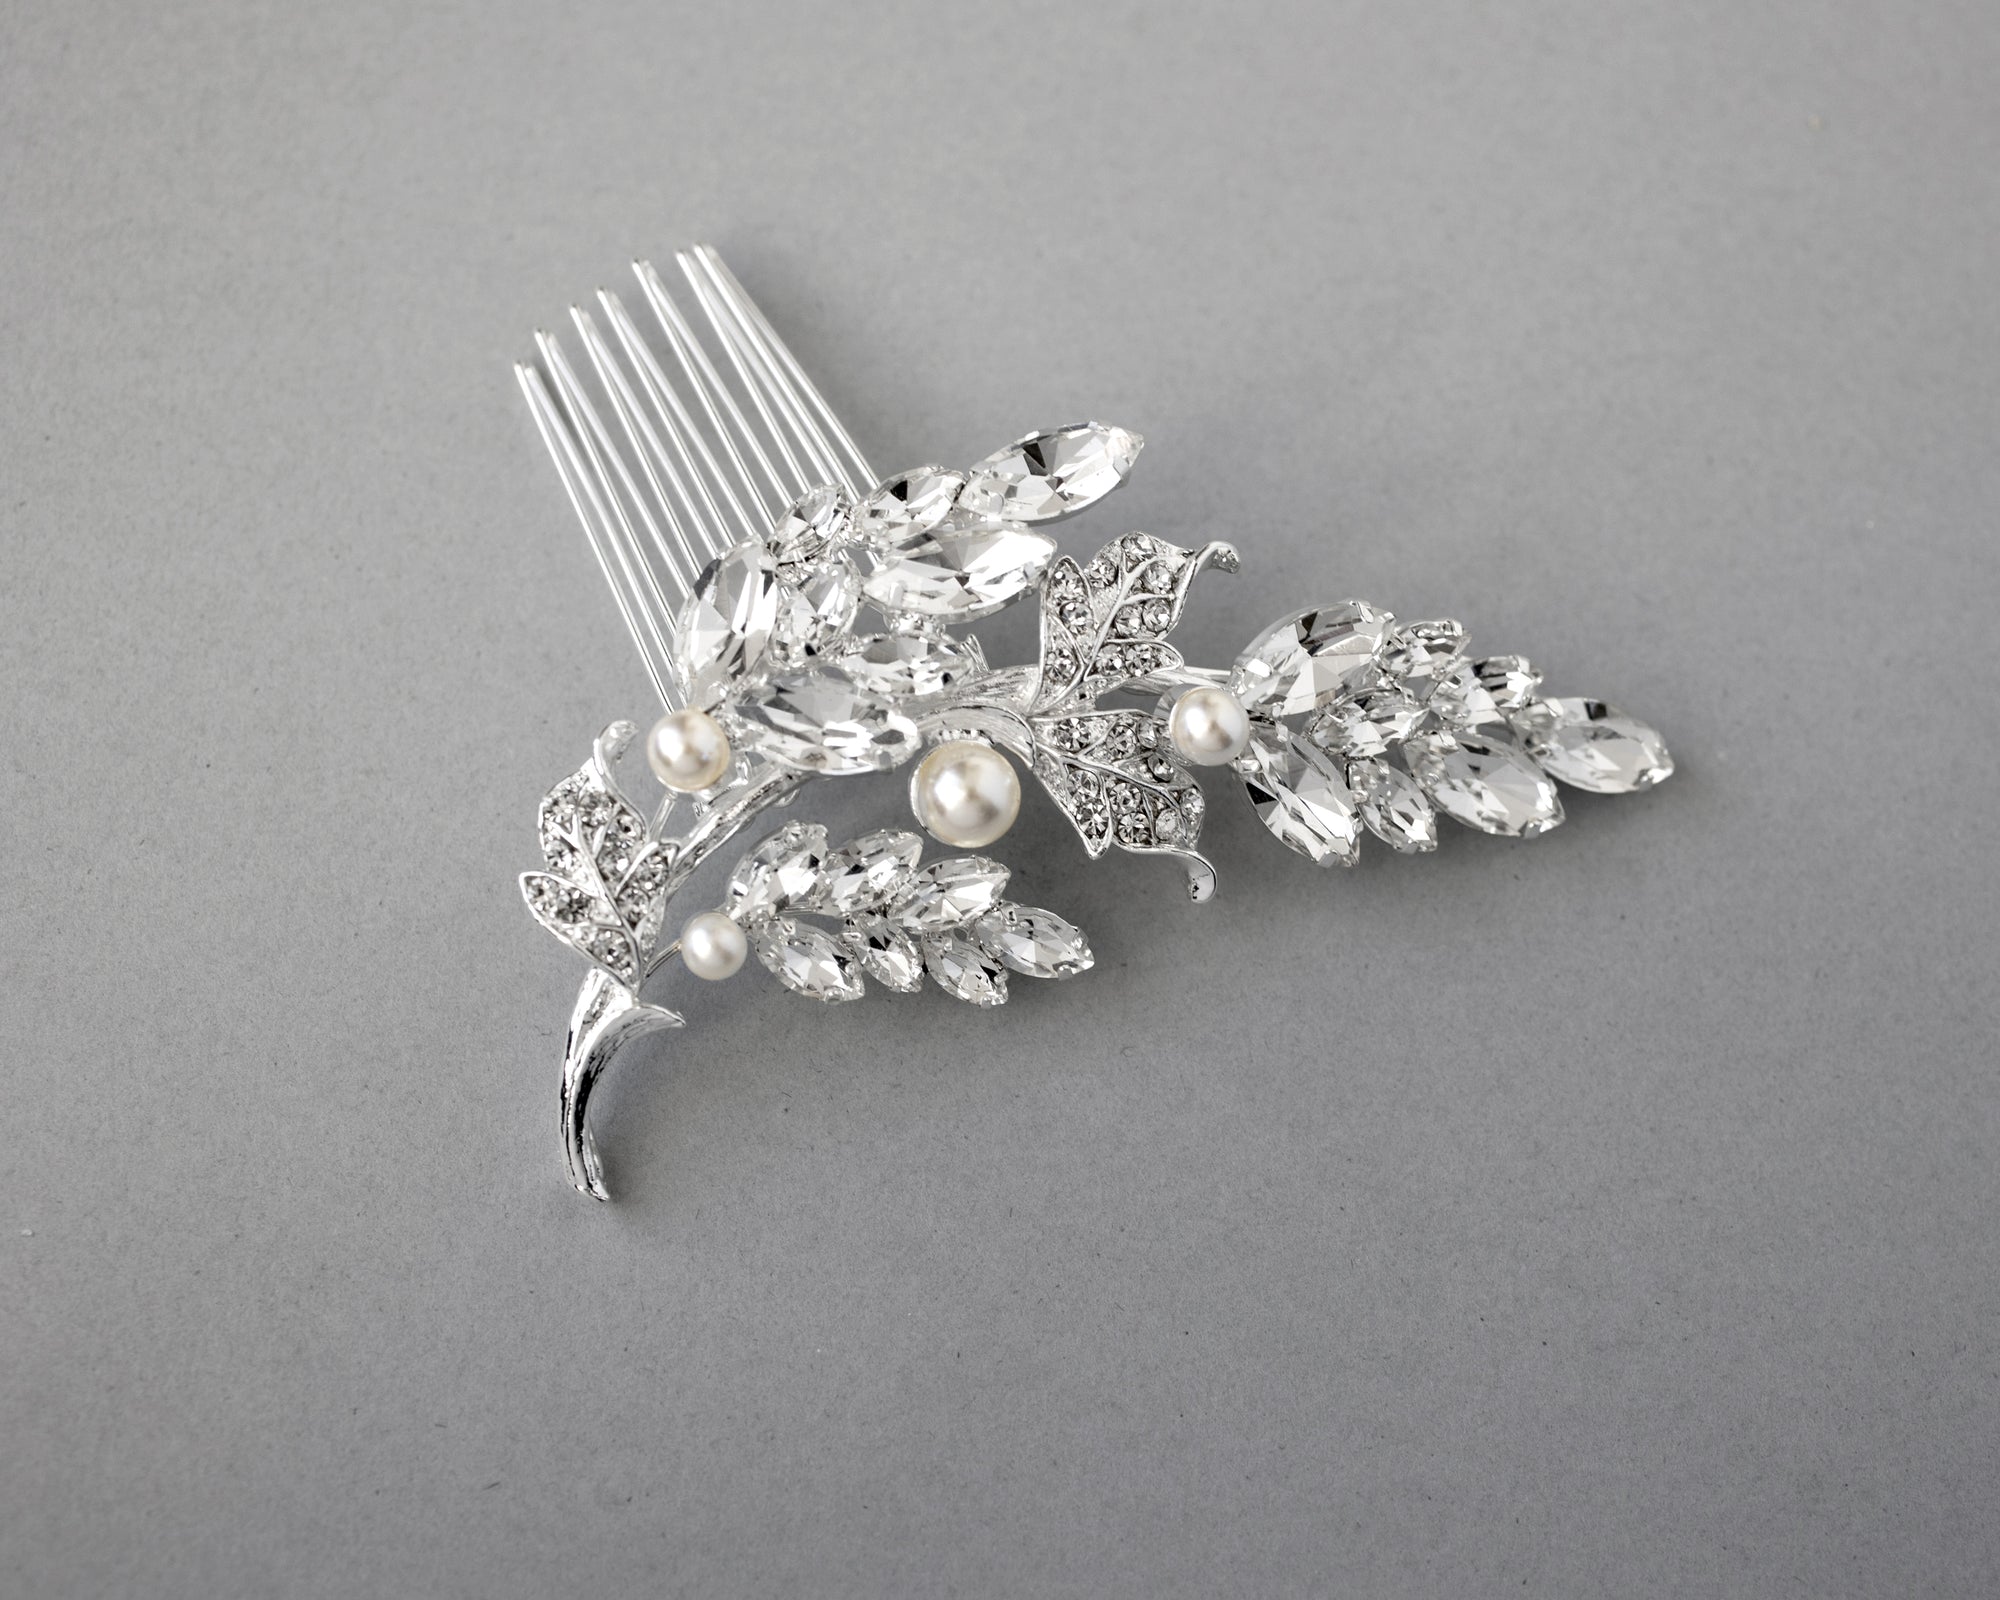 Hair Comb with Crystal Leaves and Pearls - Cassandra Lynne